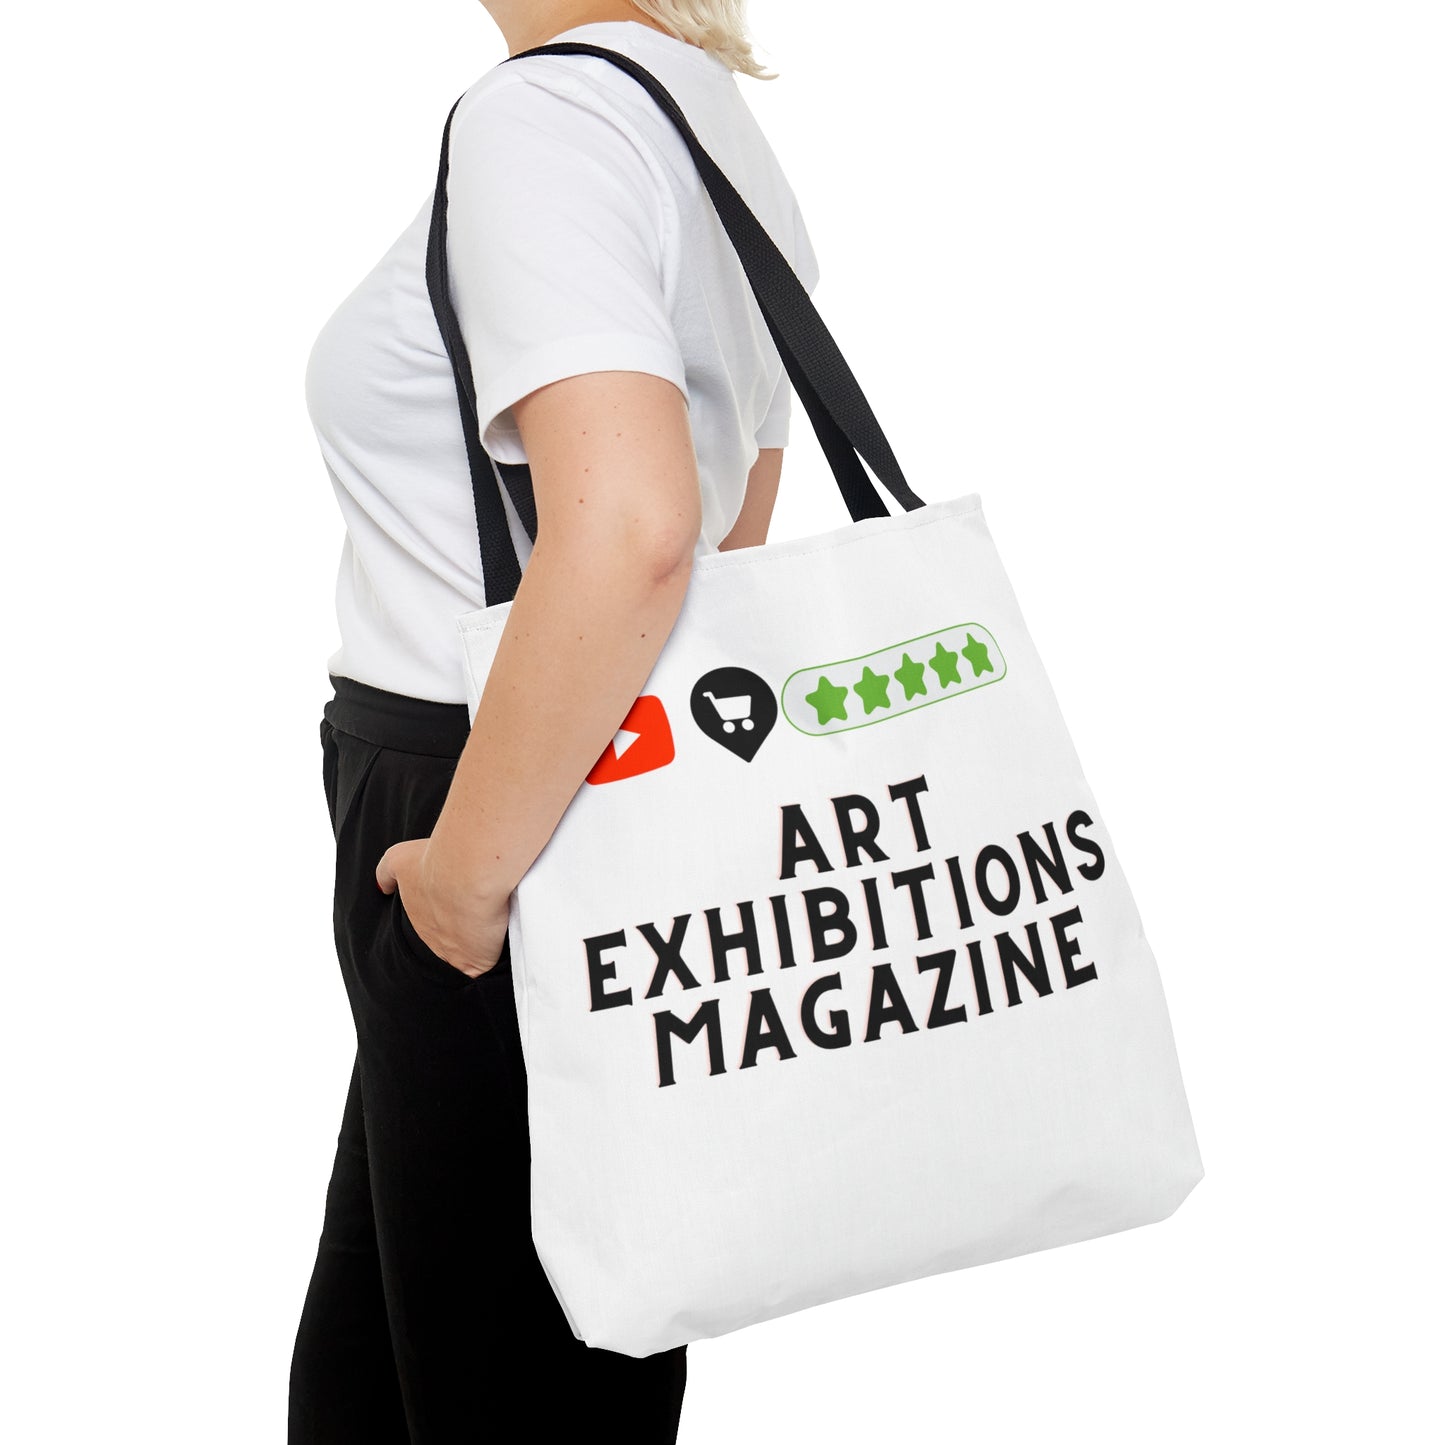 Art Exhibitions Magazine Official Large Tote Bag (AOP) w black strap by ViralDestinations